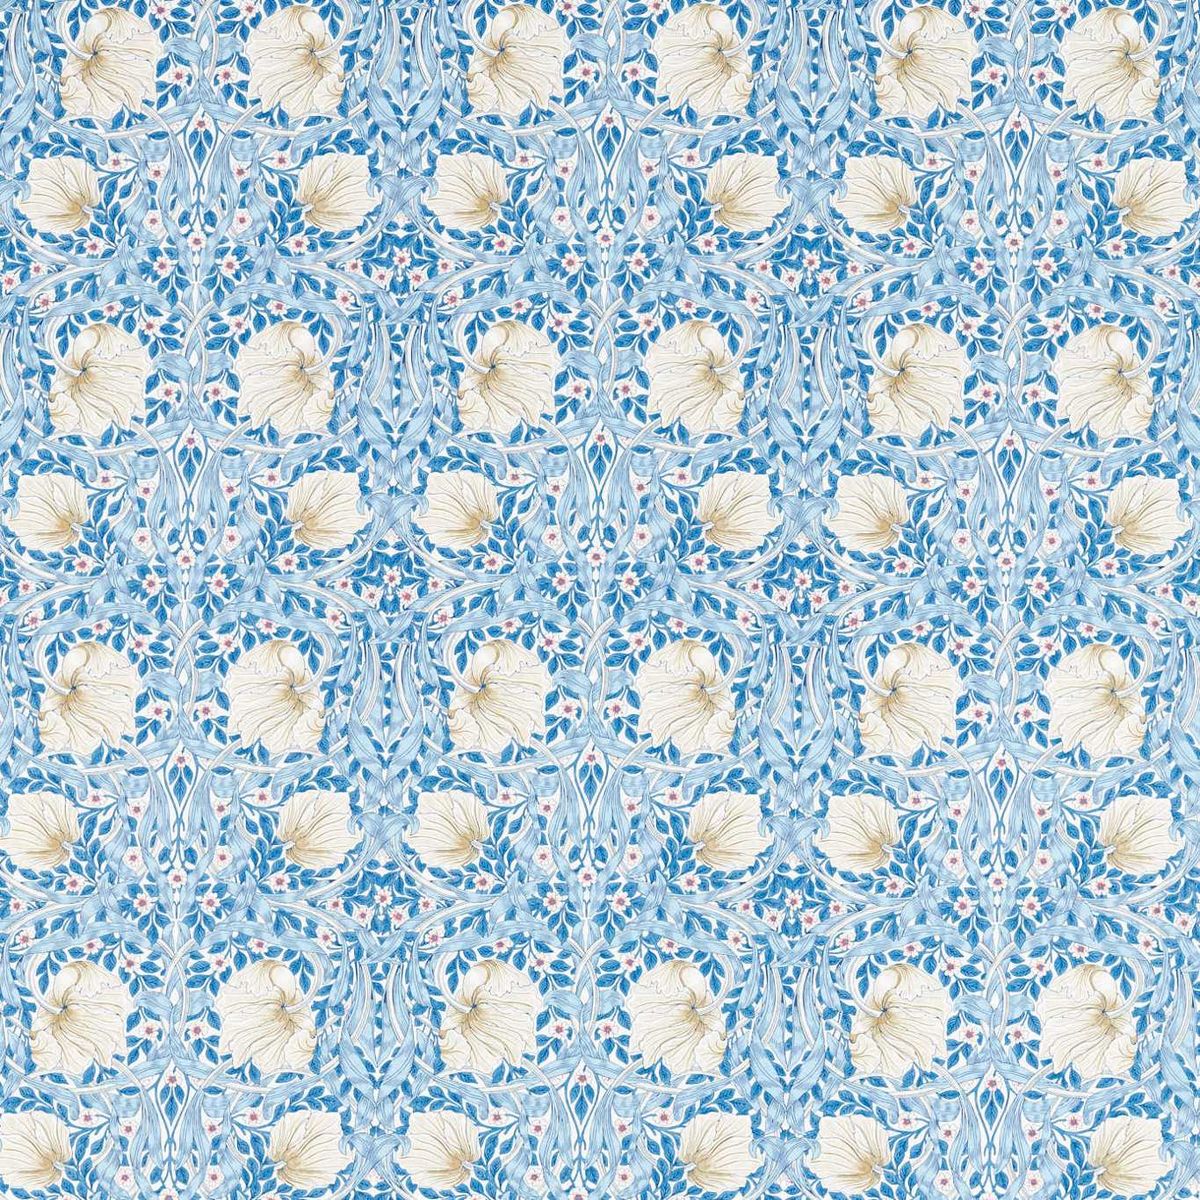 Pimpernel Woad Fabric by William Morris & Co.